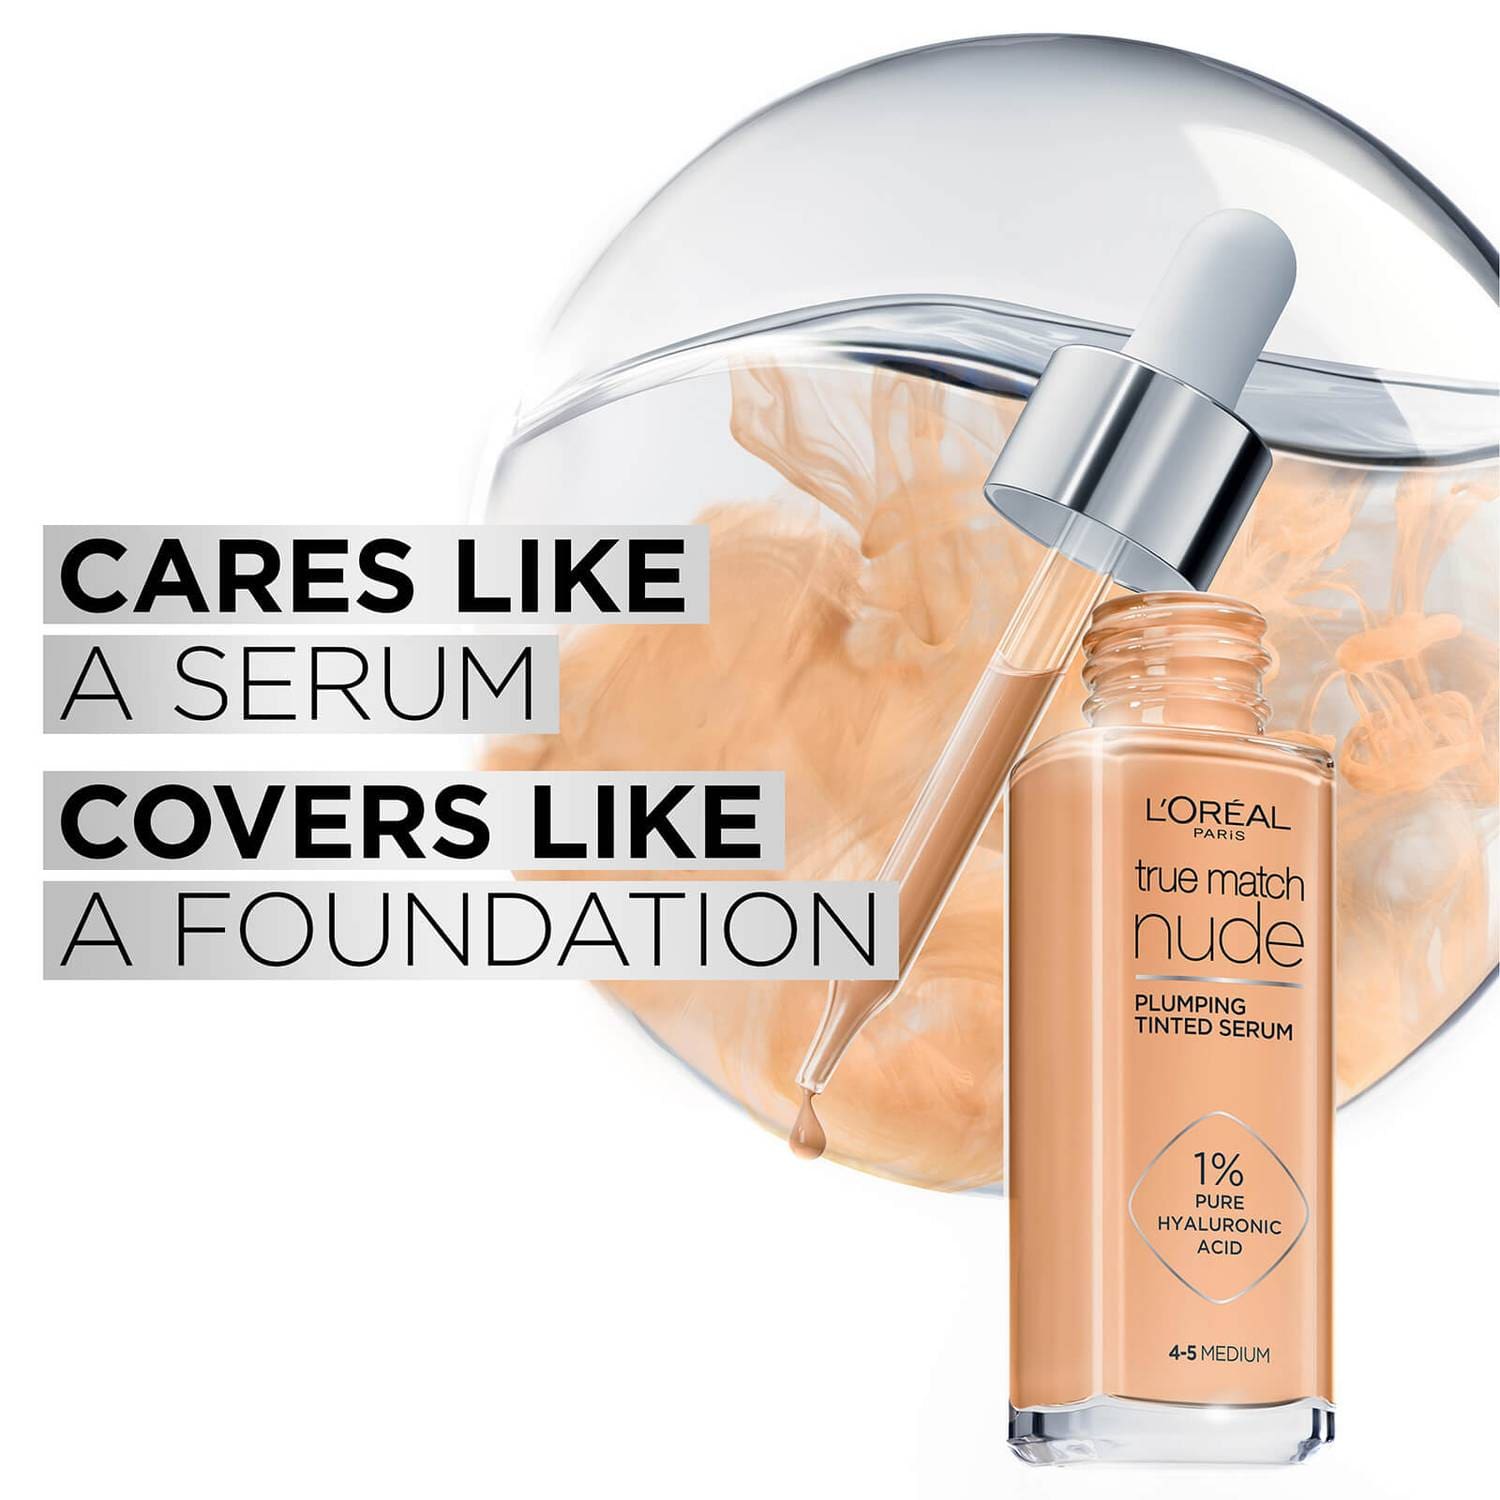 L'Oreal True Match Nude Plumping Tinted Serum